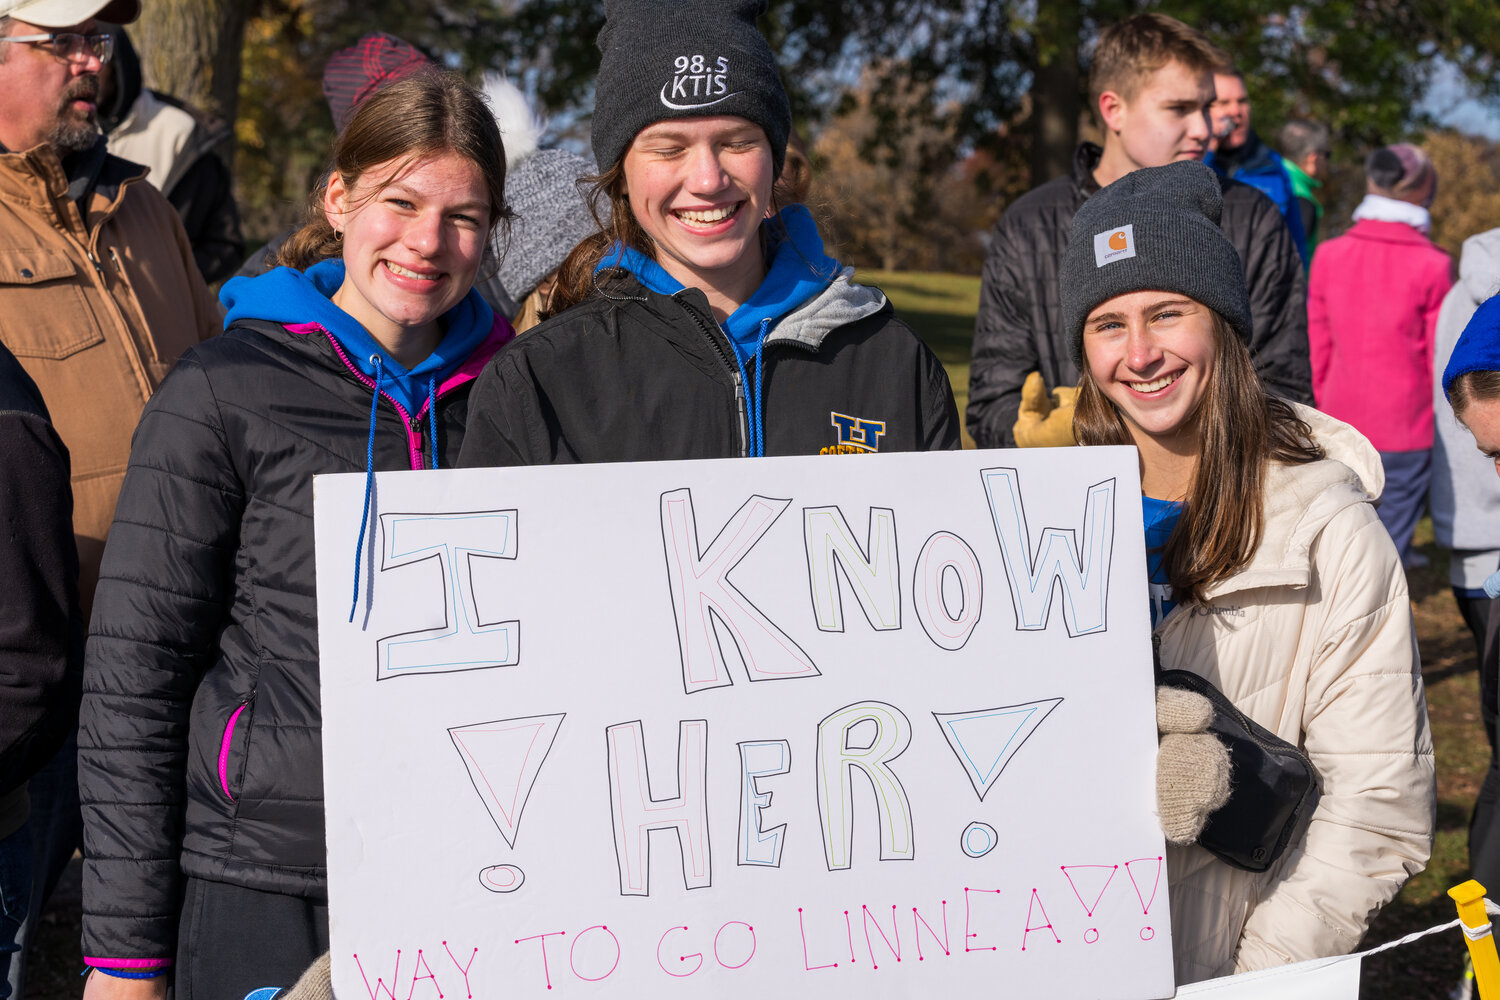 Several of the Raider runners showed up to State to support their teammate Linnea Ronning as she participated in her second state championship race. They brought a sign that said “I KNOW HER! WAY TO GO LINNEA!” at the finish line.